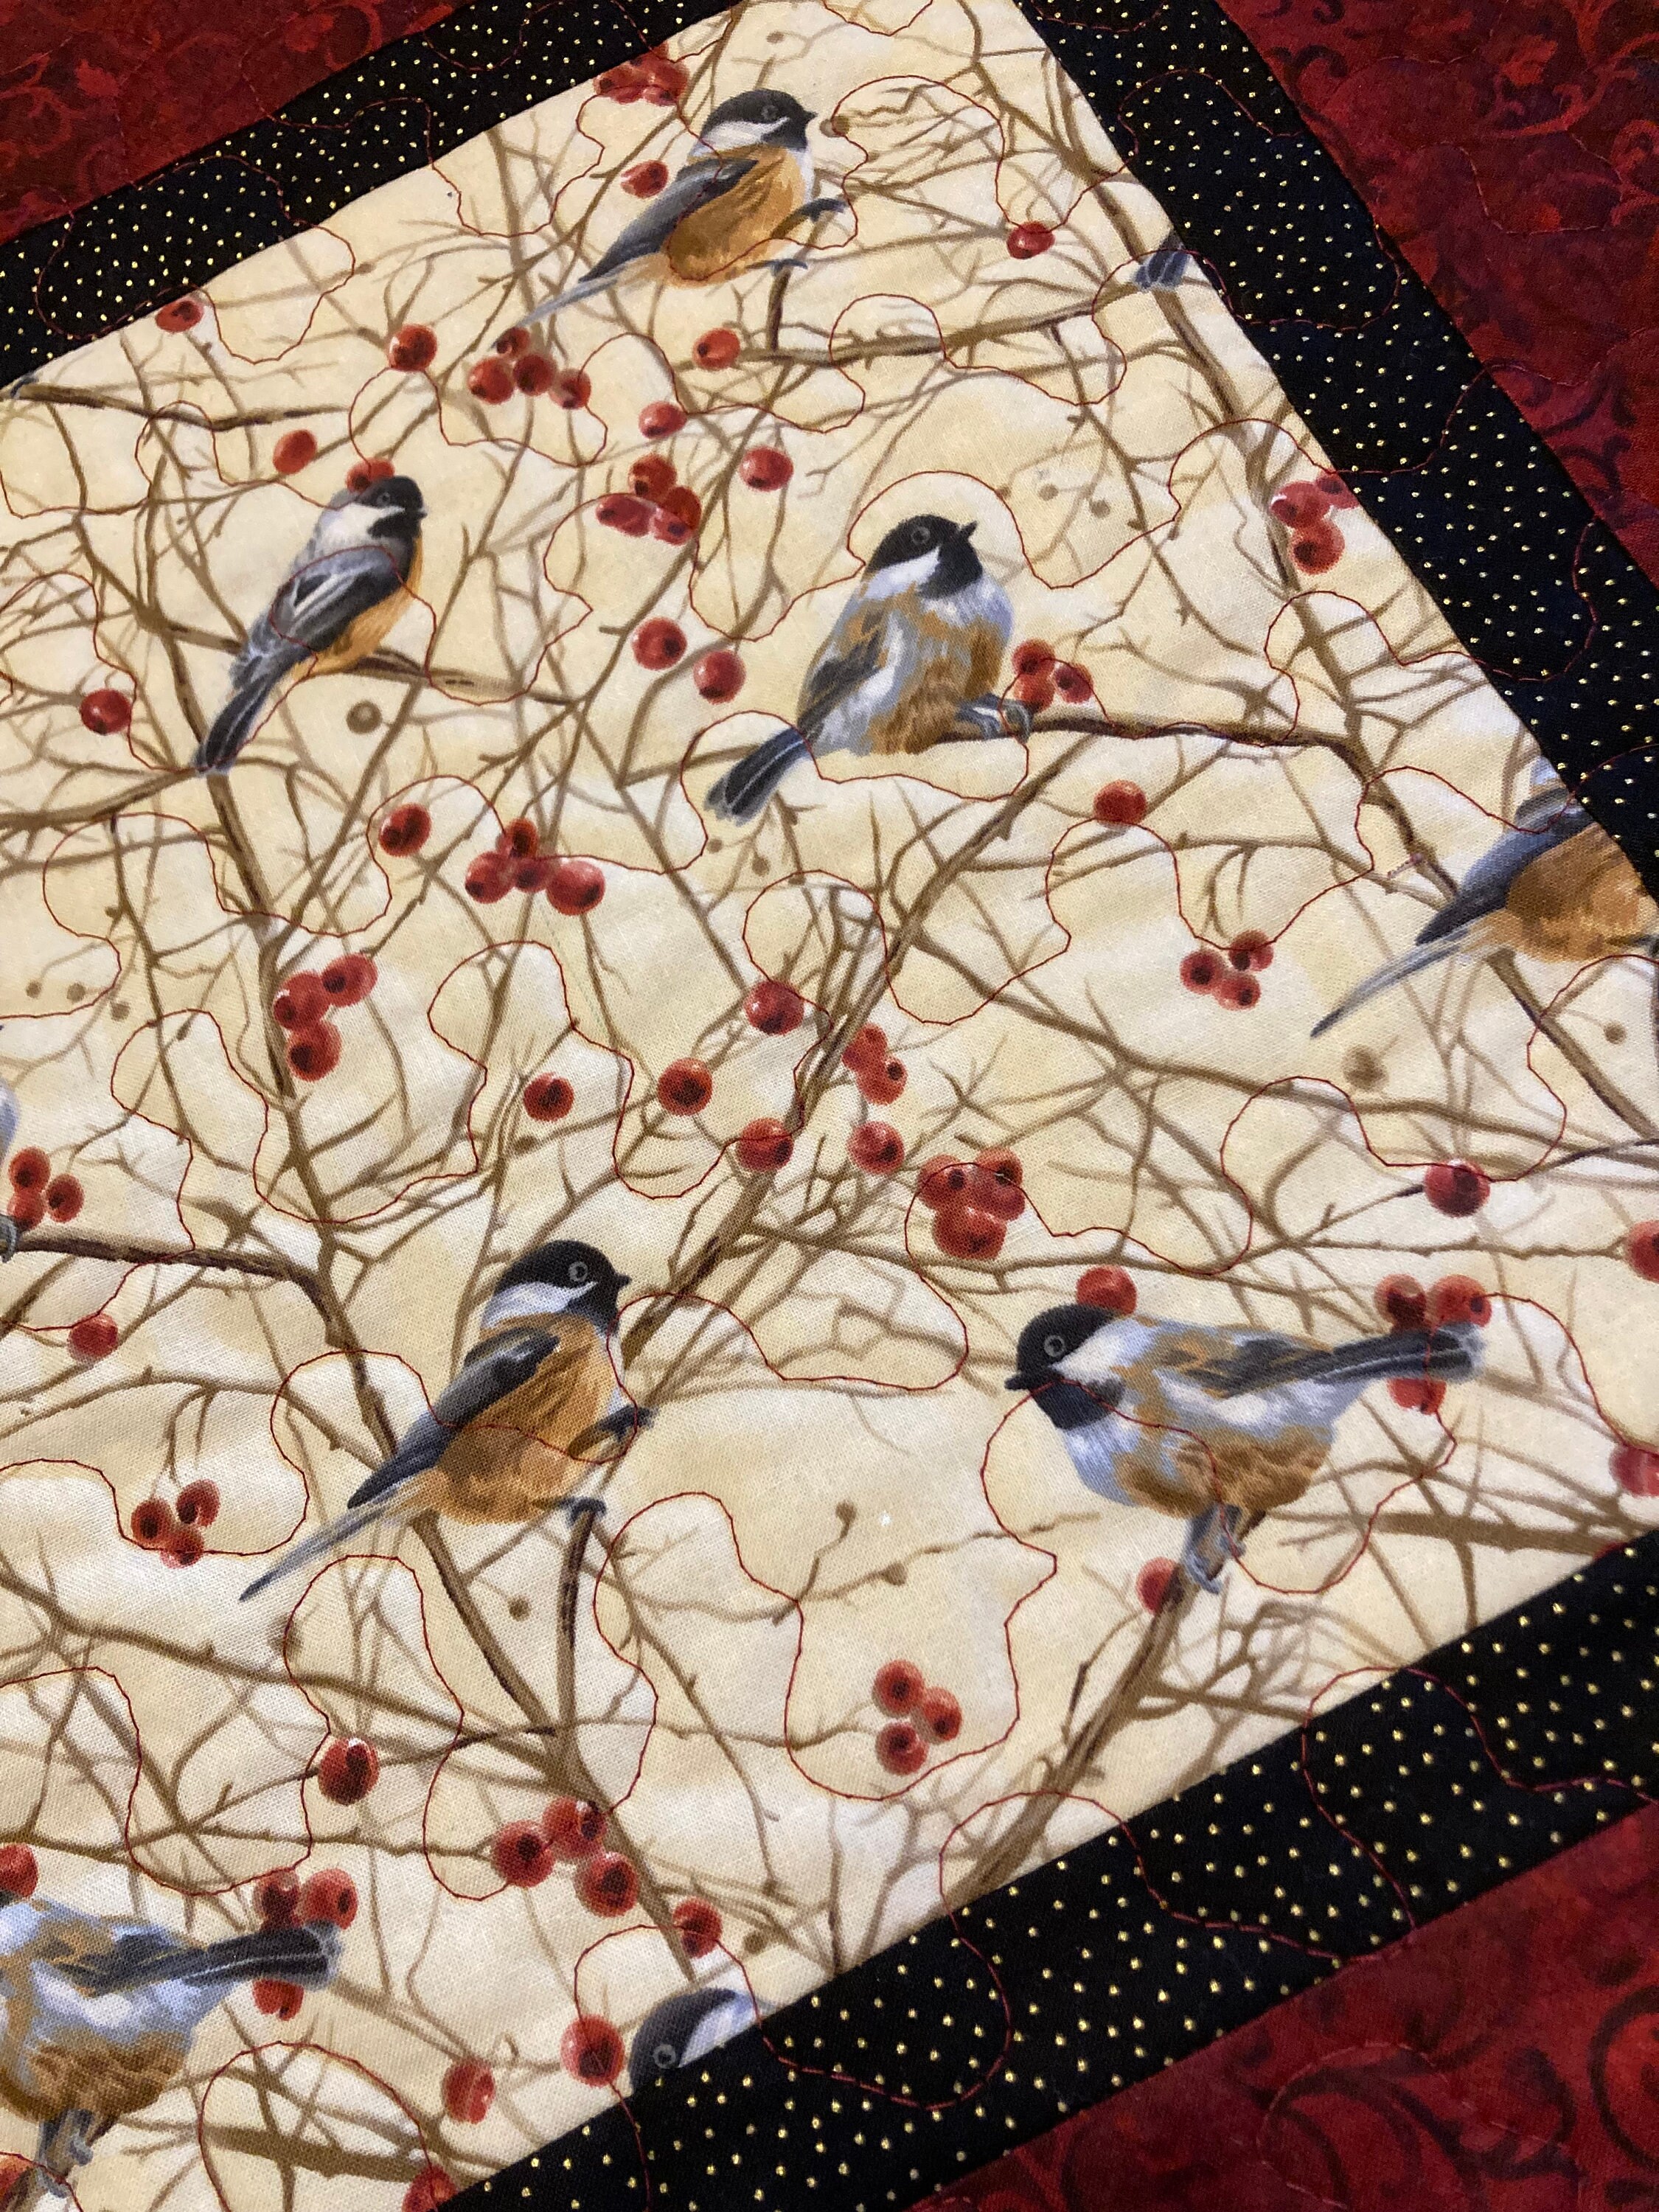 20x20 Lake Tahoe Nightstand End Table Coffee Table Large Square Mat Bird Wall Hanging Chickadee Bird Quilted Table Topper Mountain Rustic Lodge Reversible Cotton 